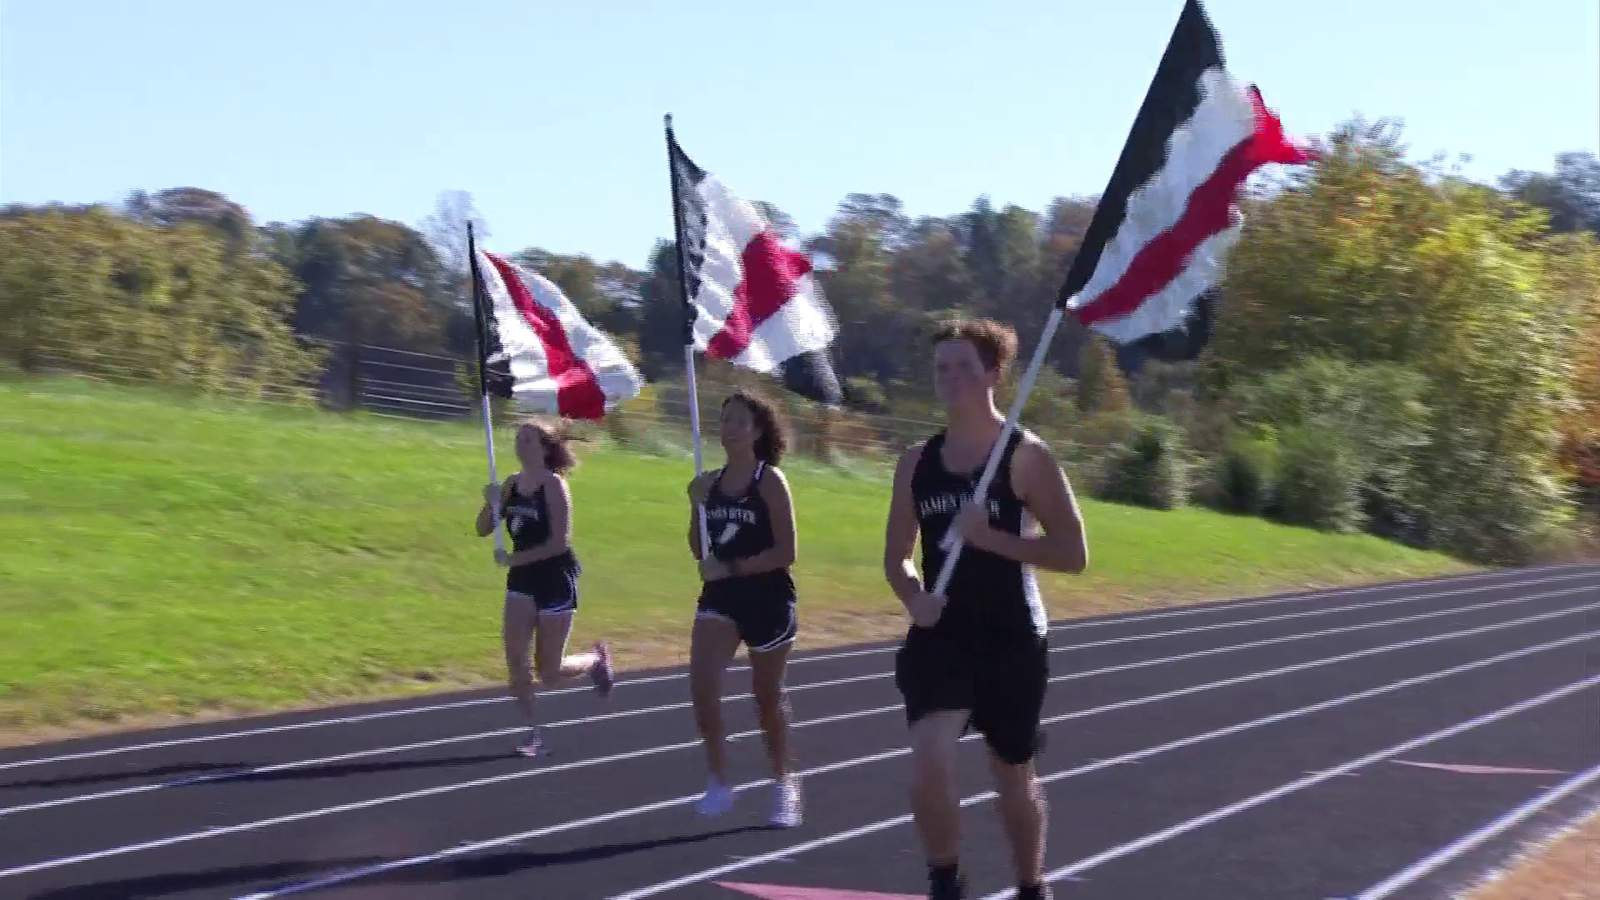 Knights cut ribbon on new all-weather track